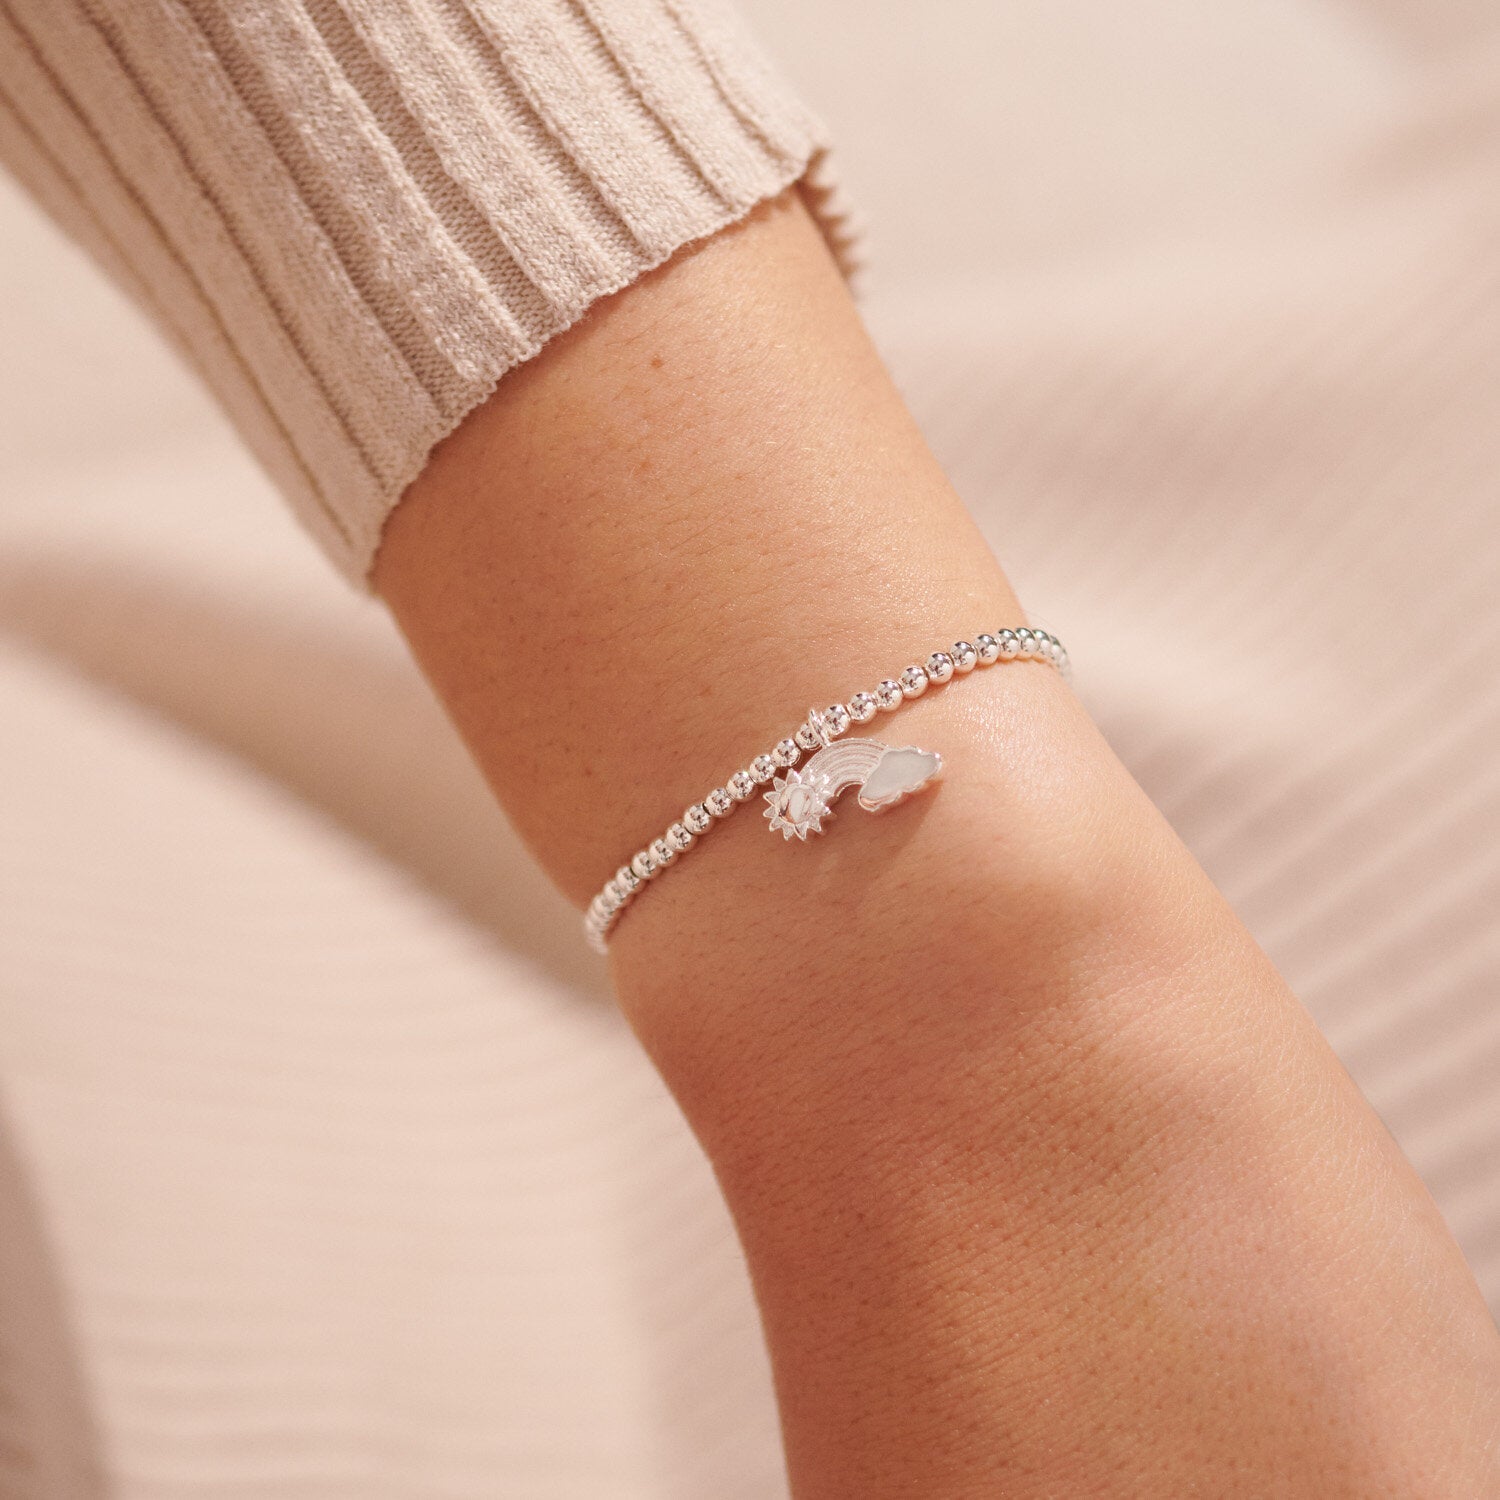 A Little - Whatever The Weather We'll Get Through It Together Bracelet - Joma jewellery